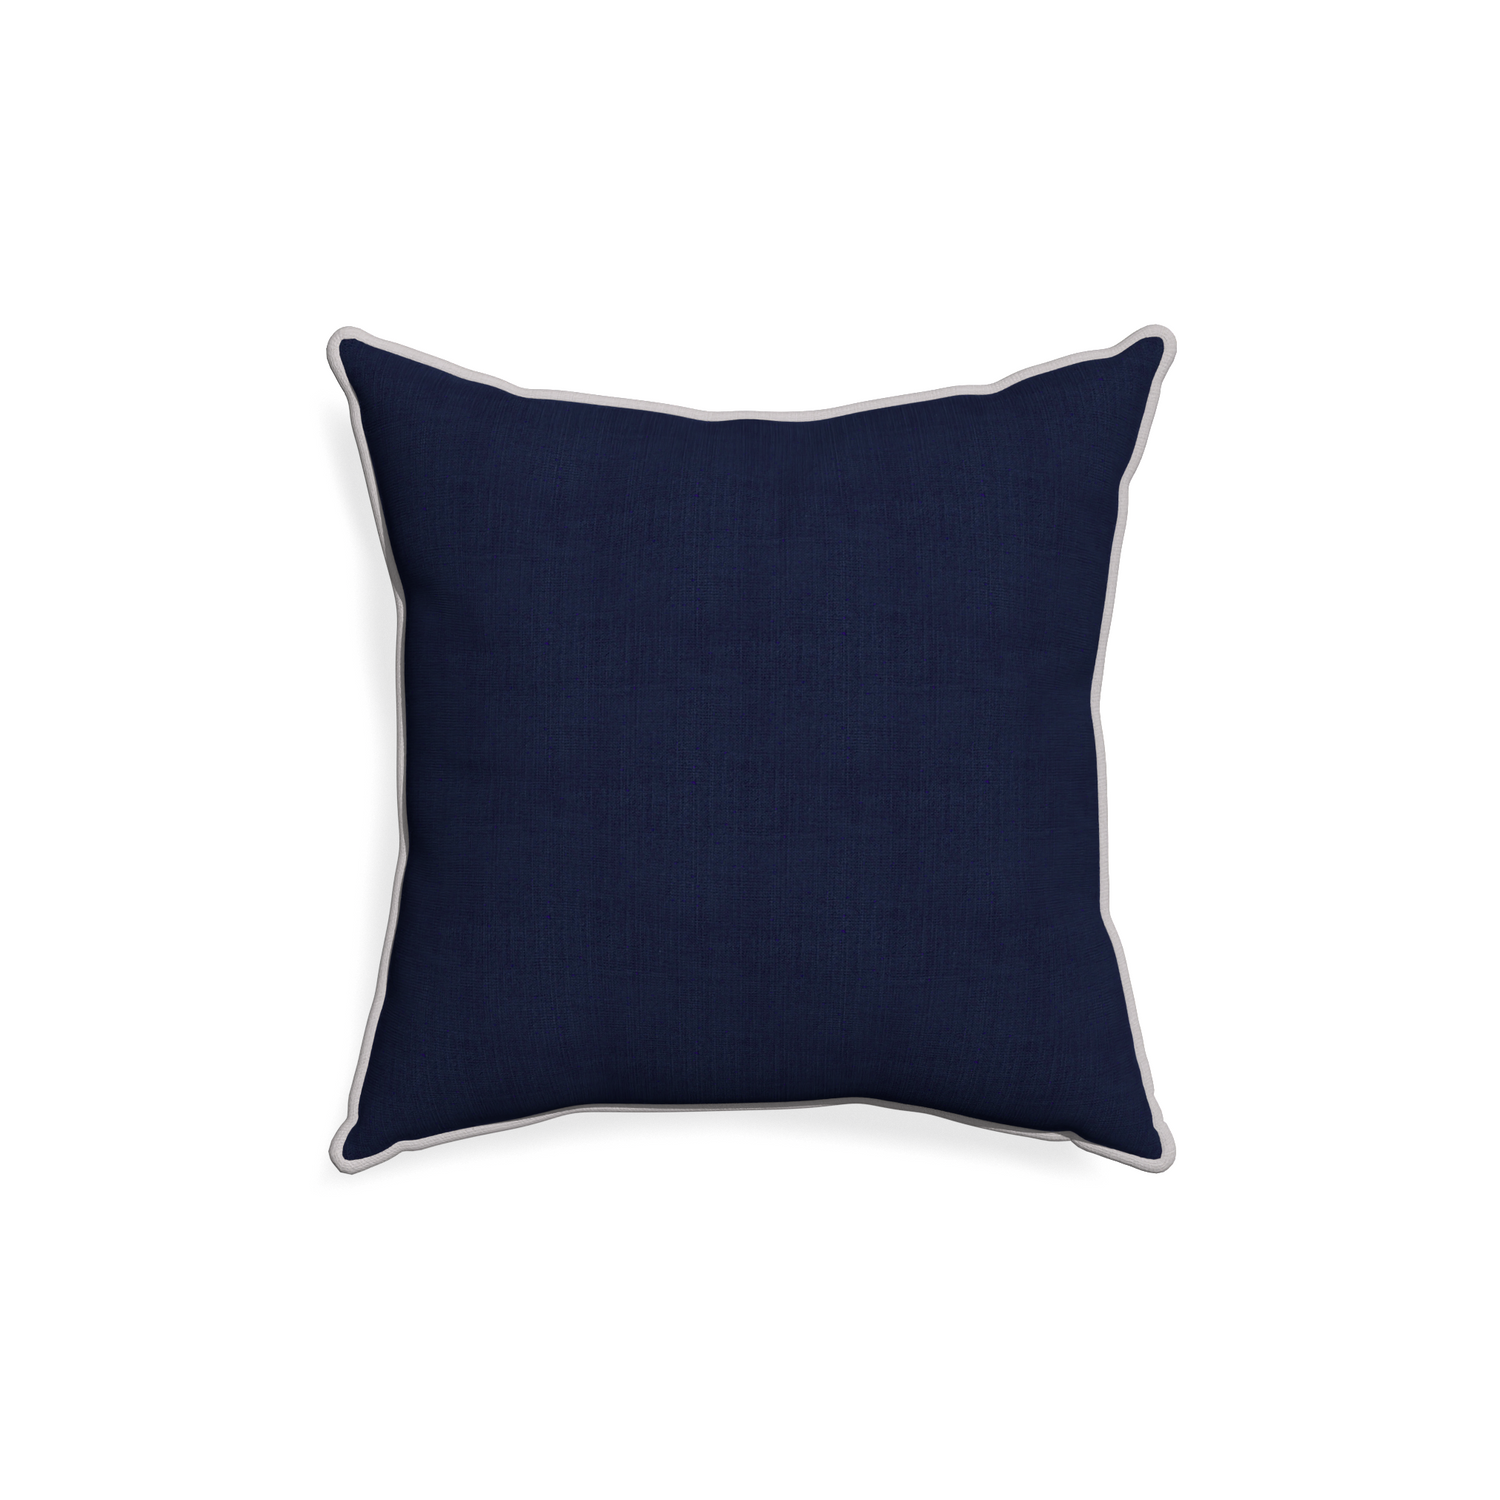 18-square midnight custom pillow with pebble piping on white background